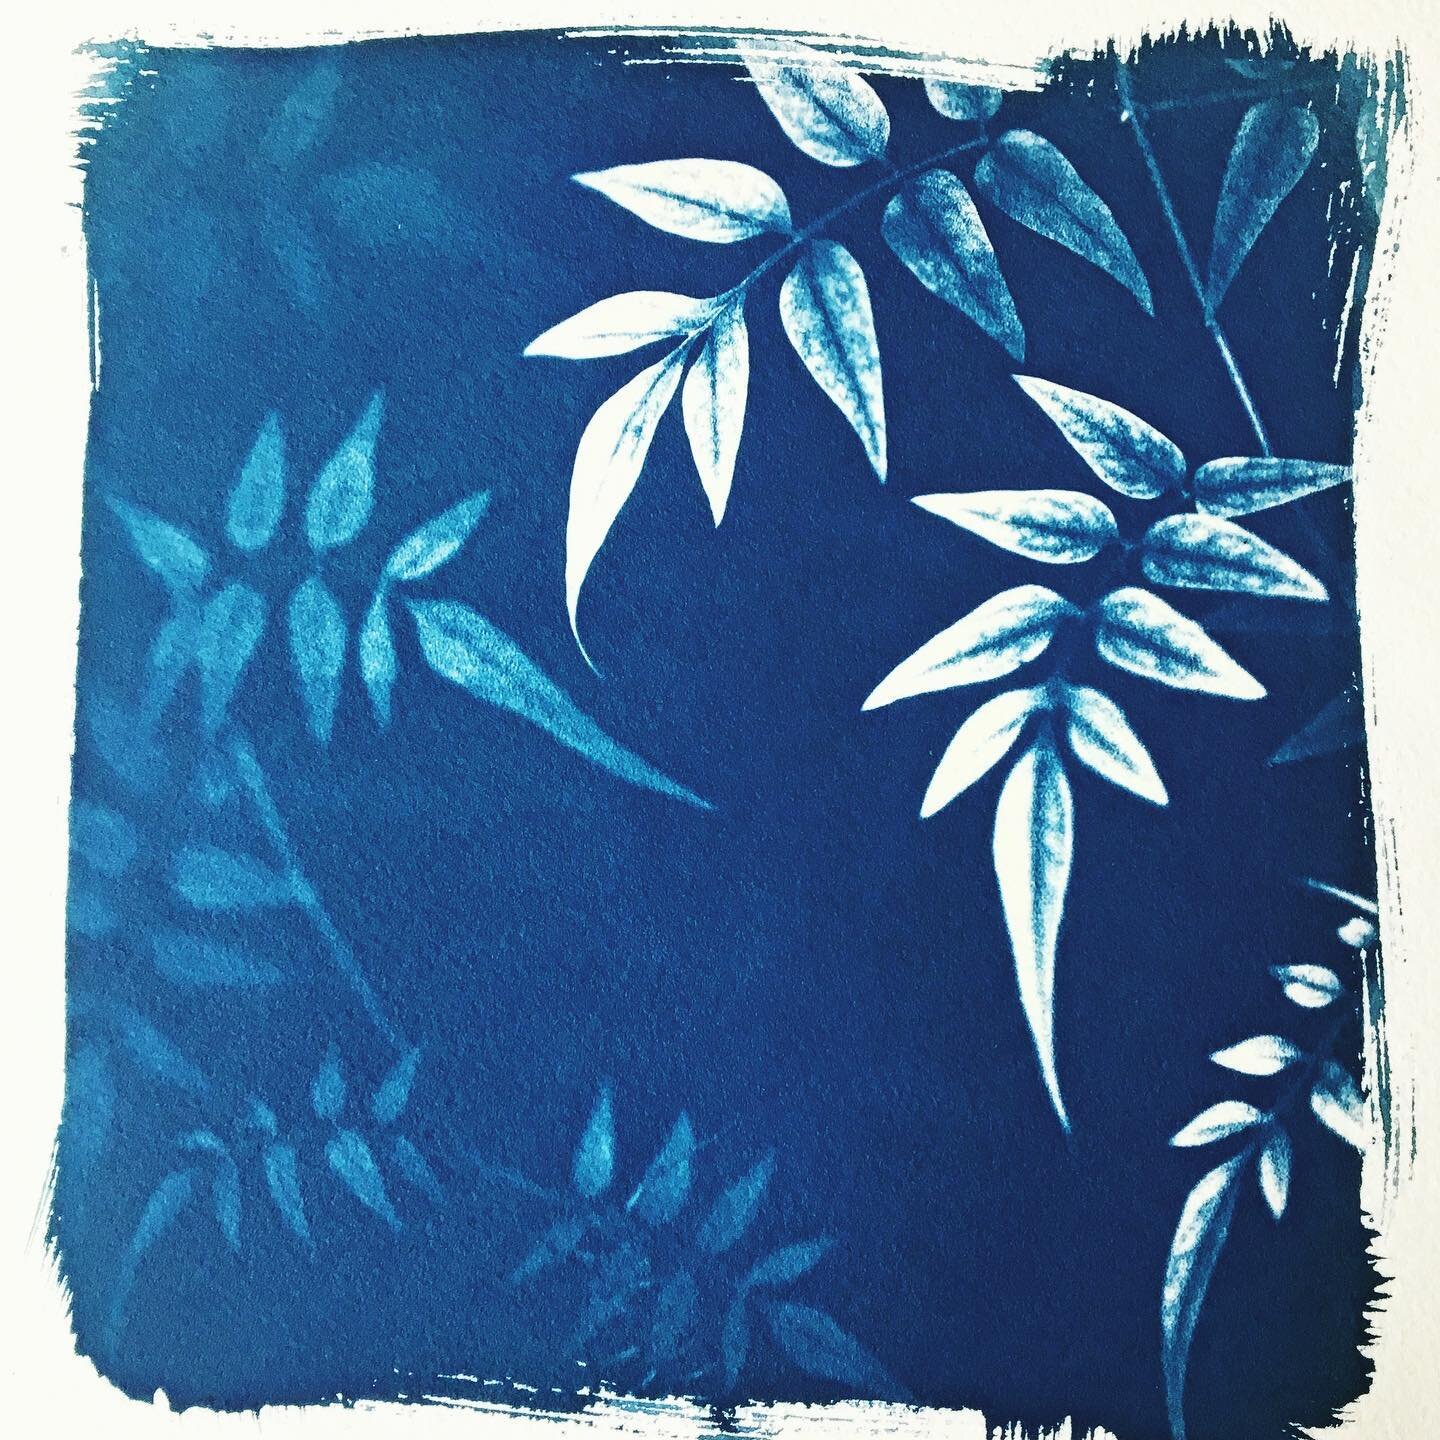 I&rsquo;ve got hundreds of photos that I want to print out on acetate to see how they work for cyanotypes. I&rsquo;m looking to invest in a decent A3 printer if anyone has any suggestions? 😊
This is one of my very first cyanotypes using an acetate n